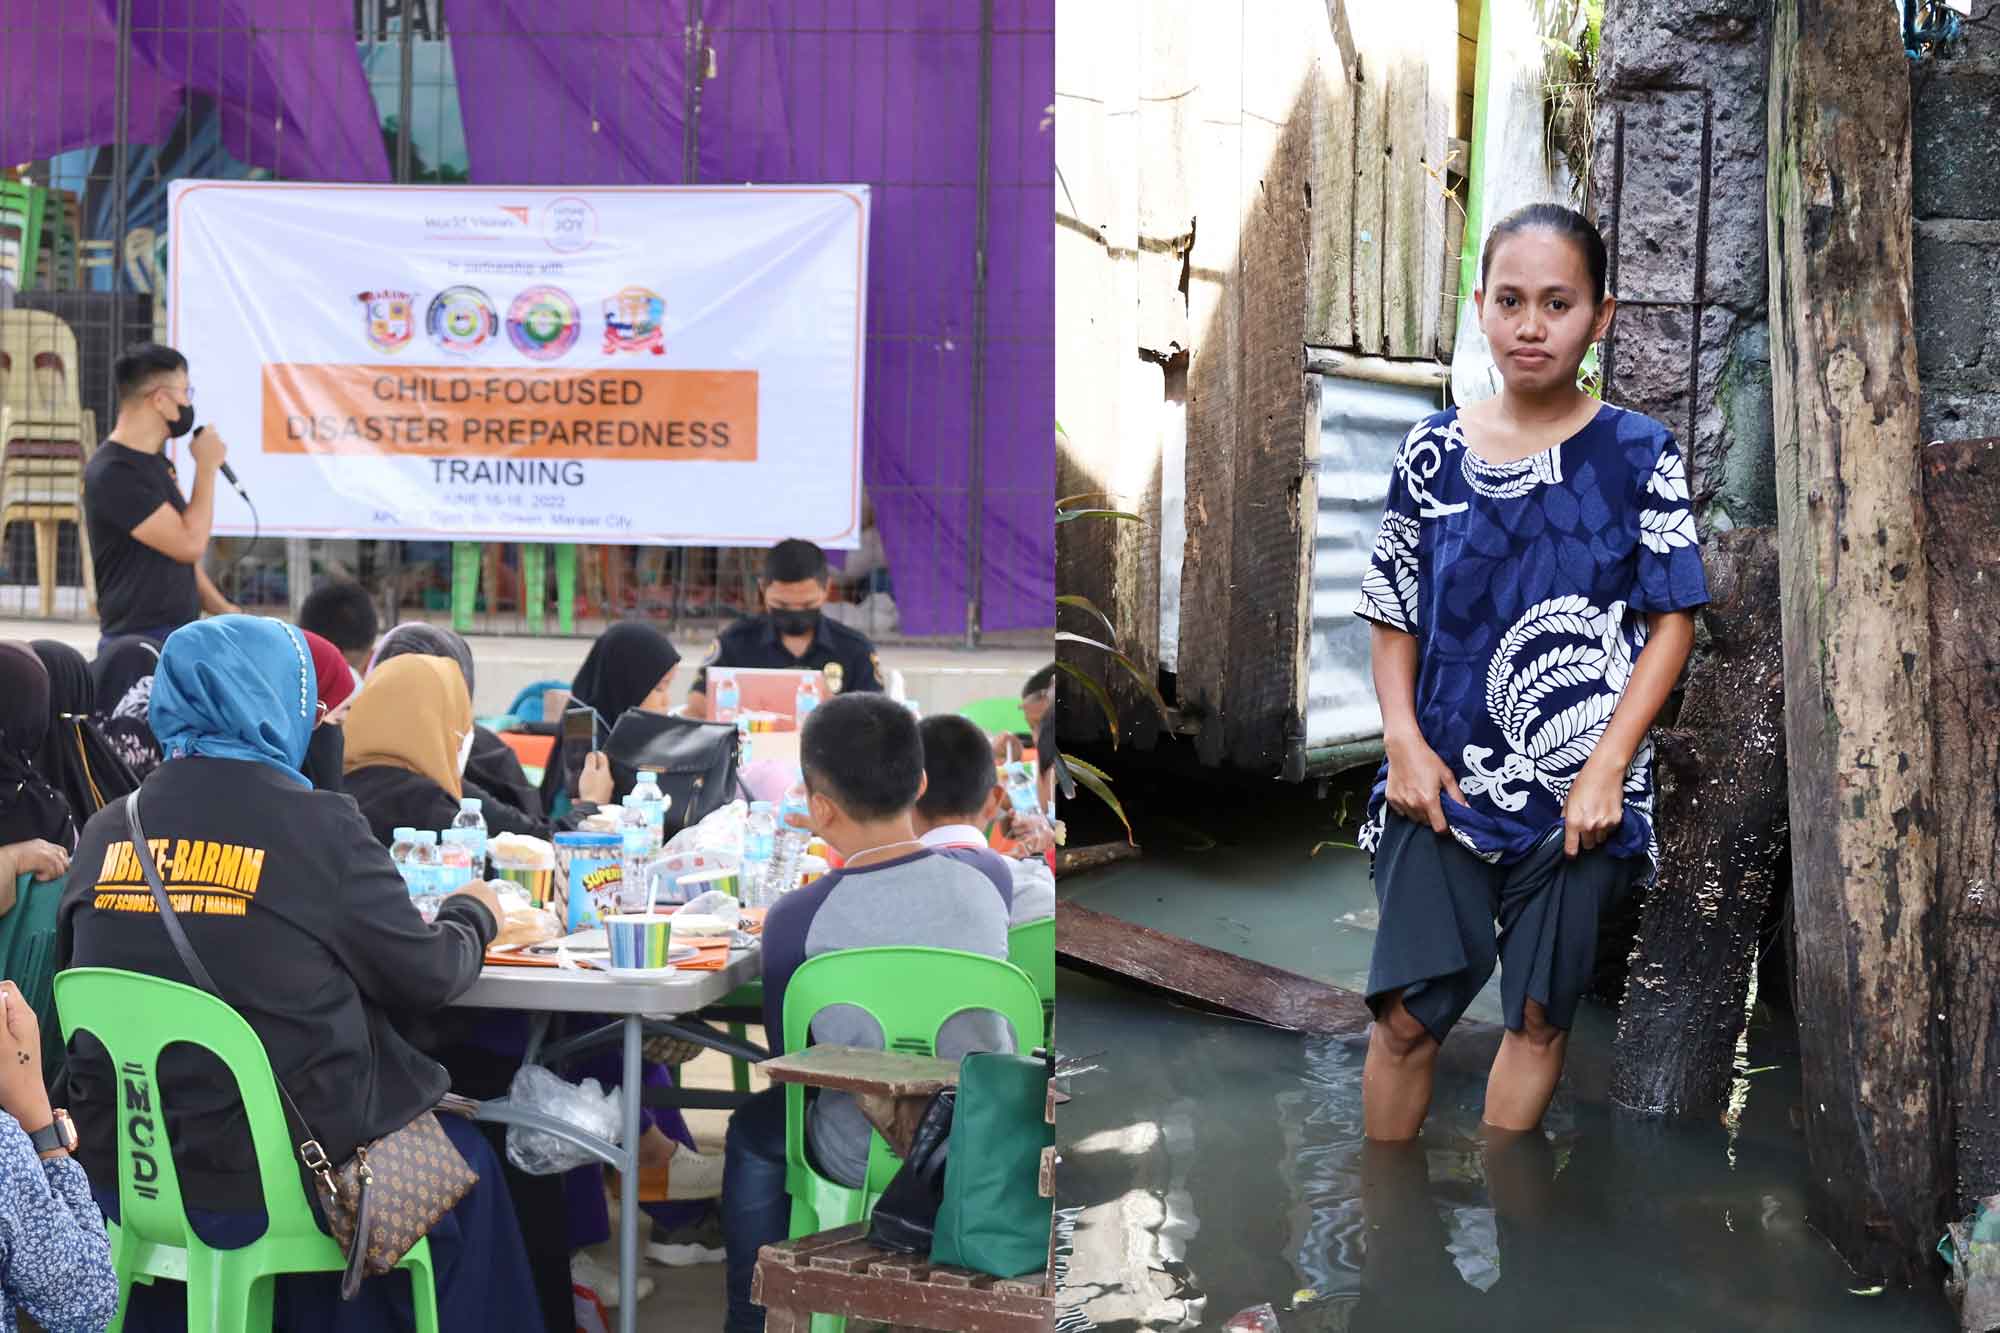 Left image: a group of people are seated, as they attend a World Vision Child-Focused Disaster Preparedness training session. Right image: a woman wearing a blue patterned shirt and grey shorts stands knee deep in flood water.  